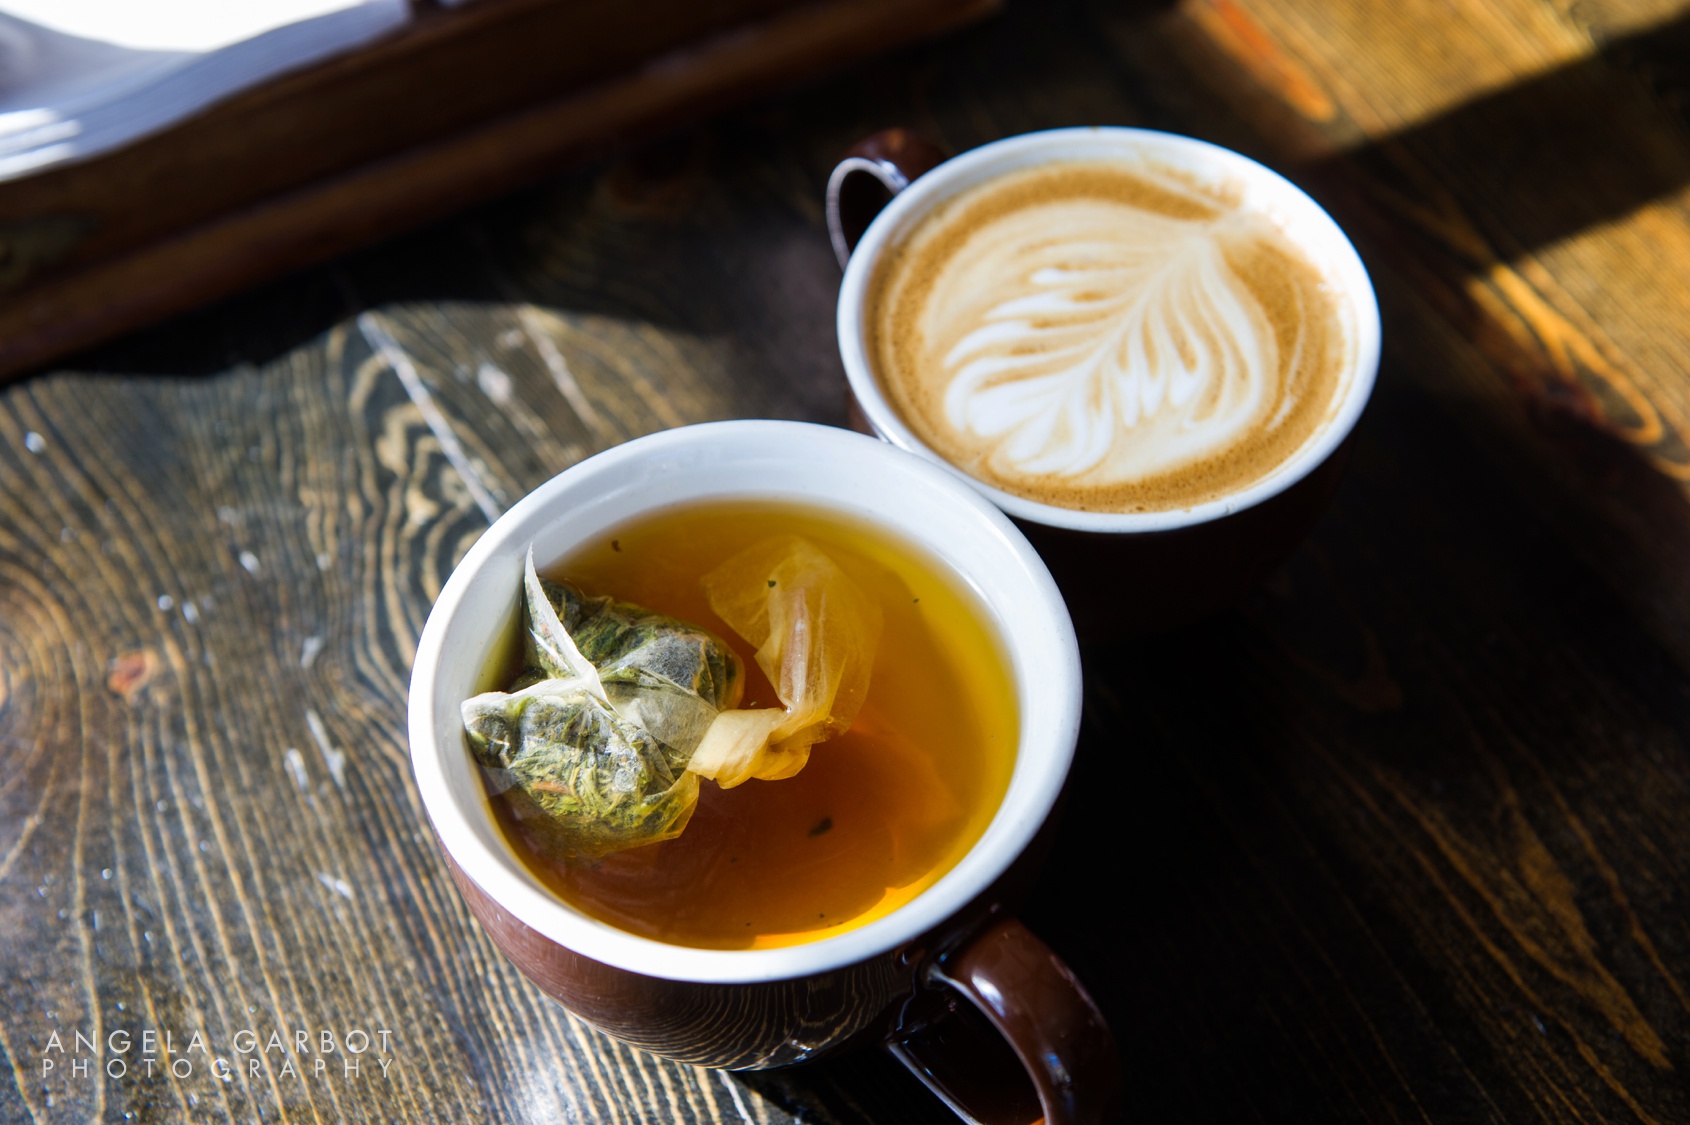 Branding Photography of green tea at Heritage Bicycles Coffee Shop in Lakeview in Chicago by Angela Garbot Photography